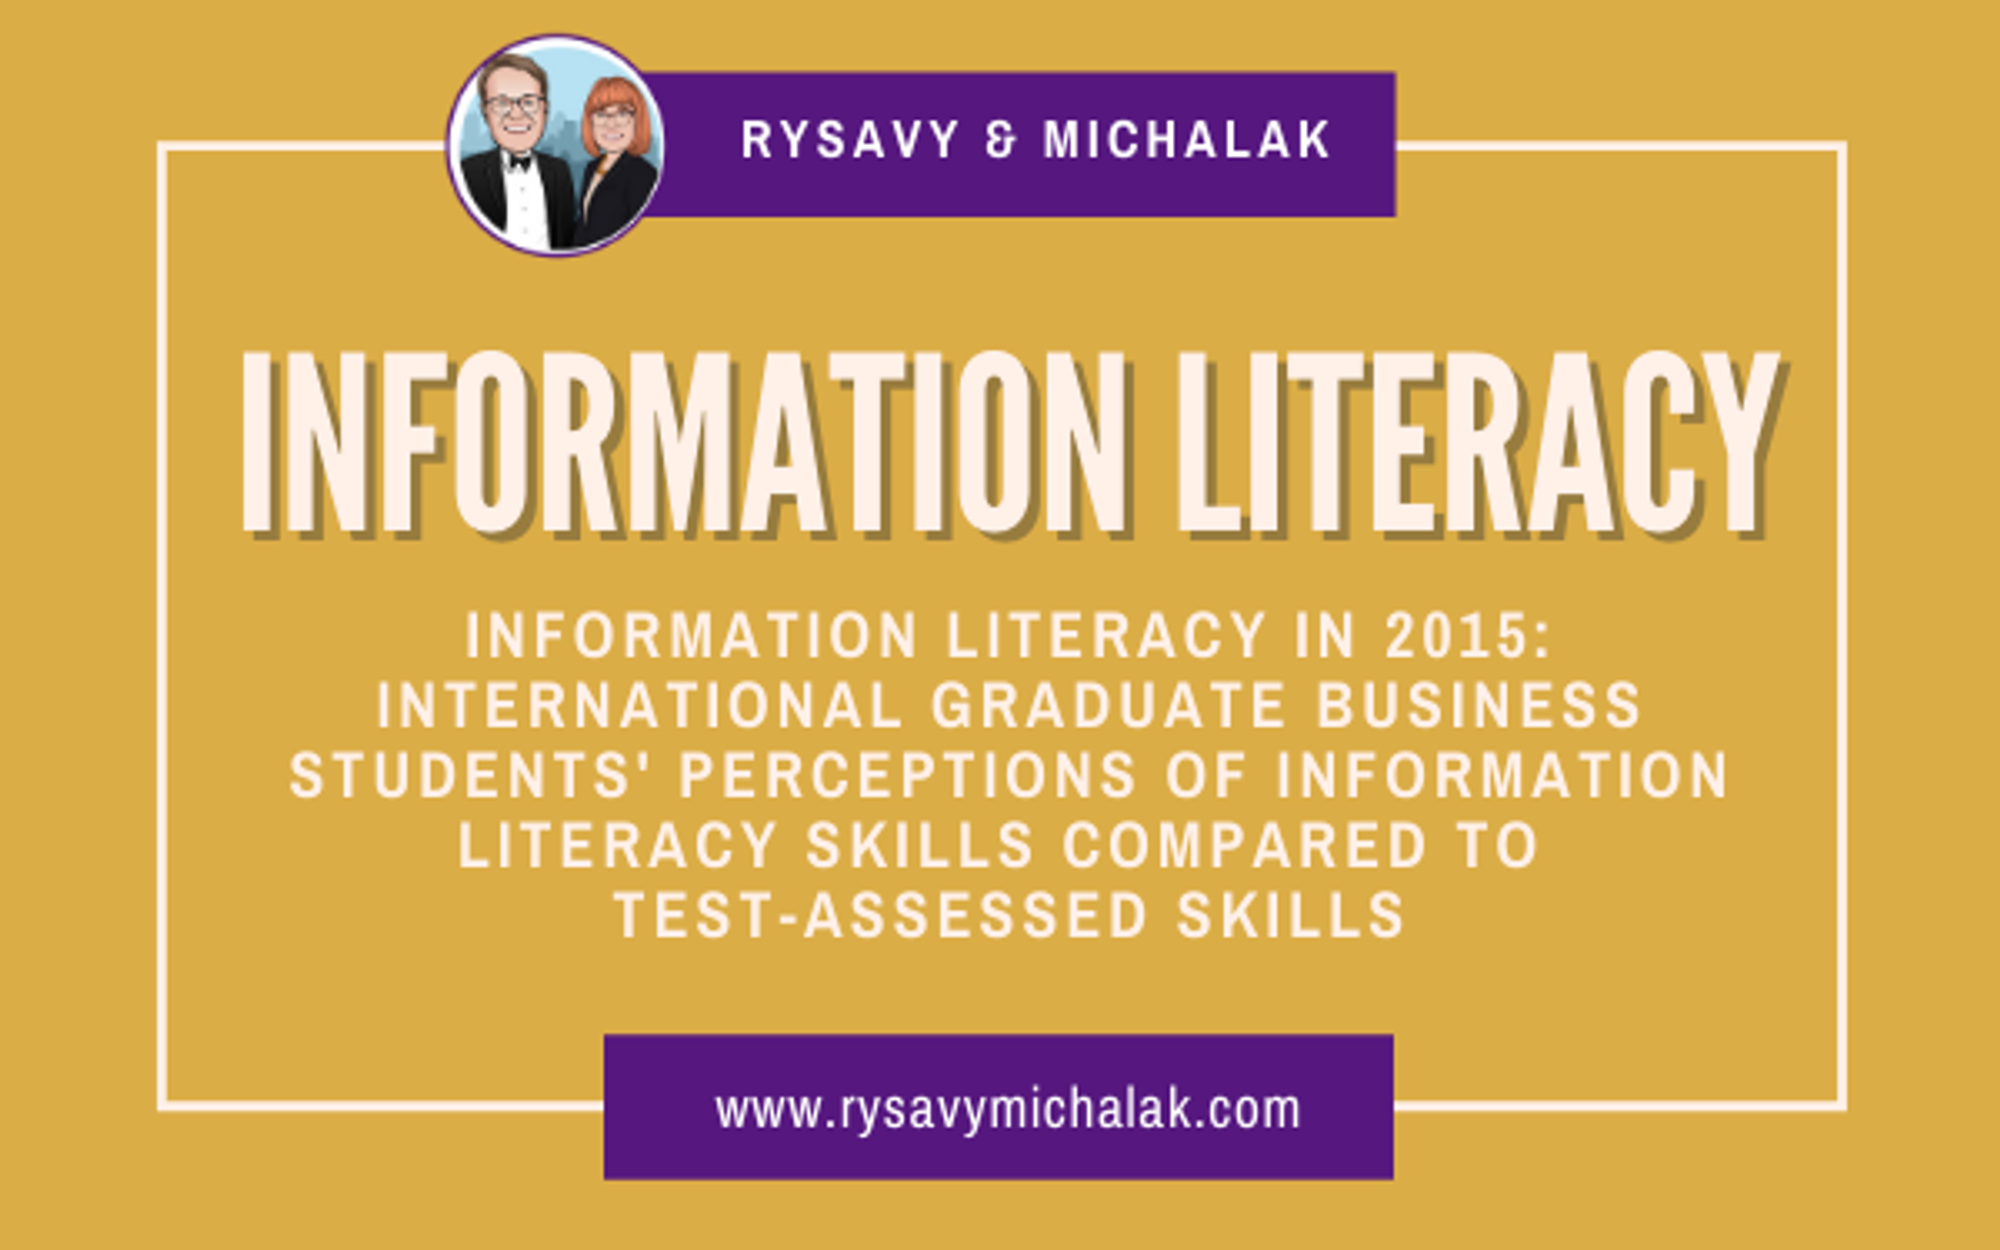 Information literacy in 2015: International graduate business students' perceptions of information literacy skills compared to test-assessed skills